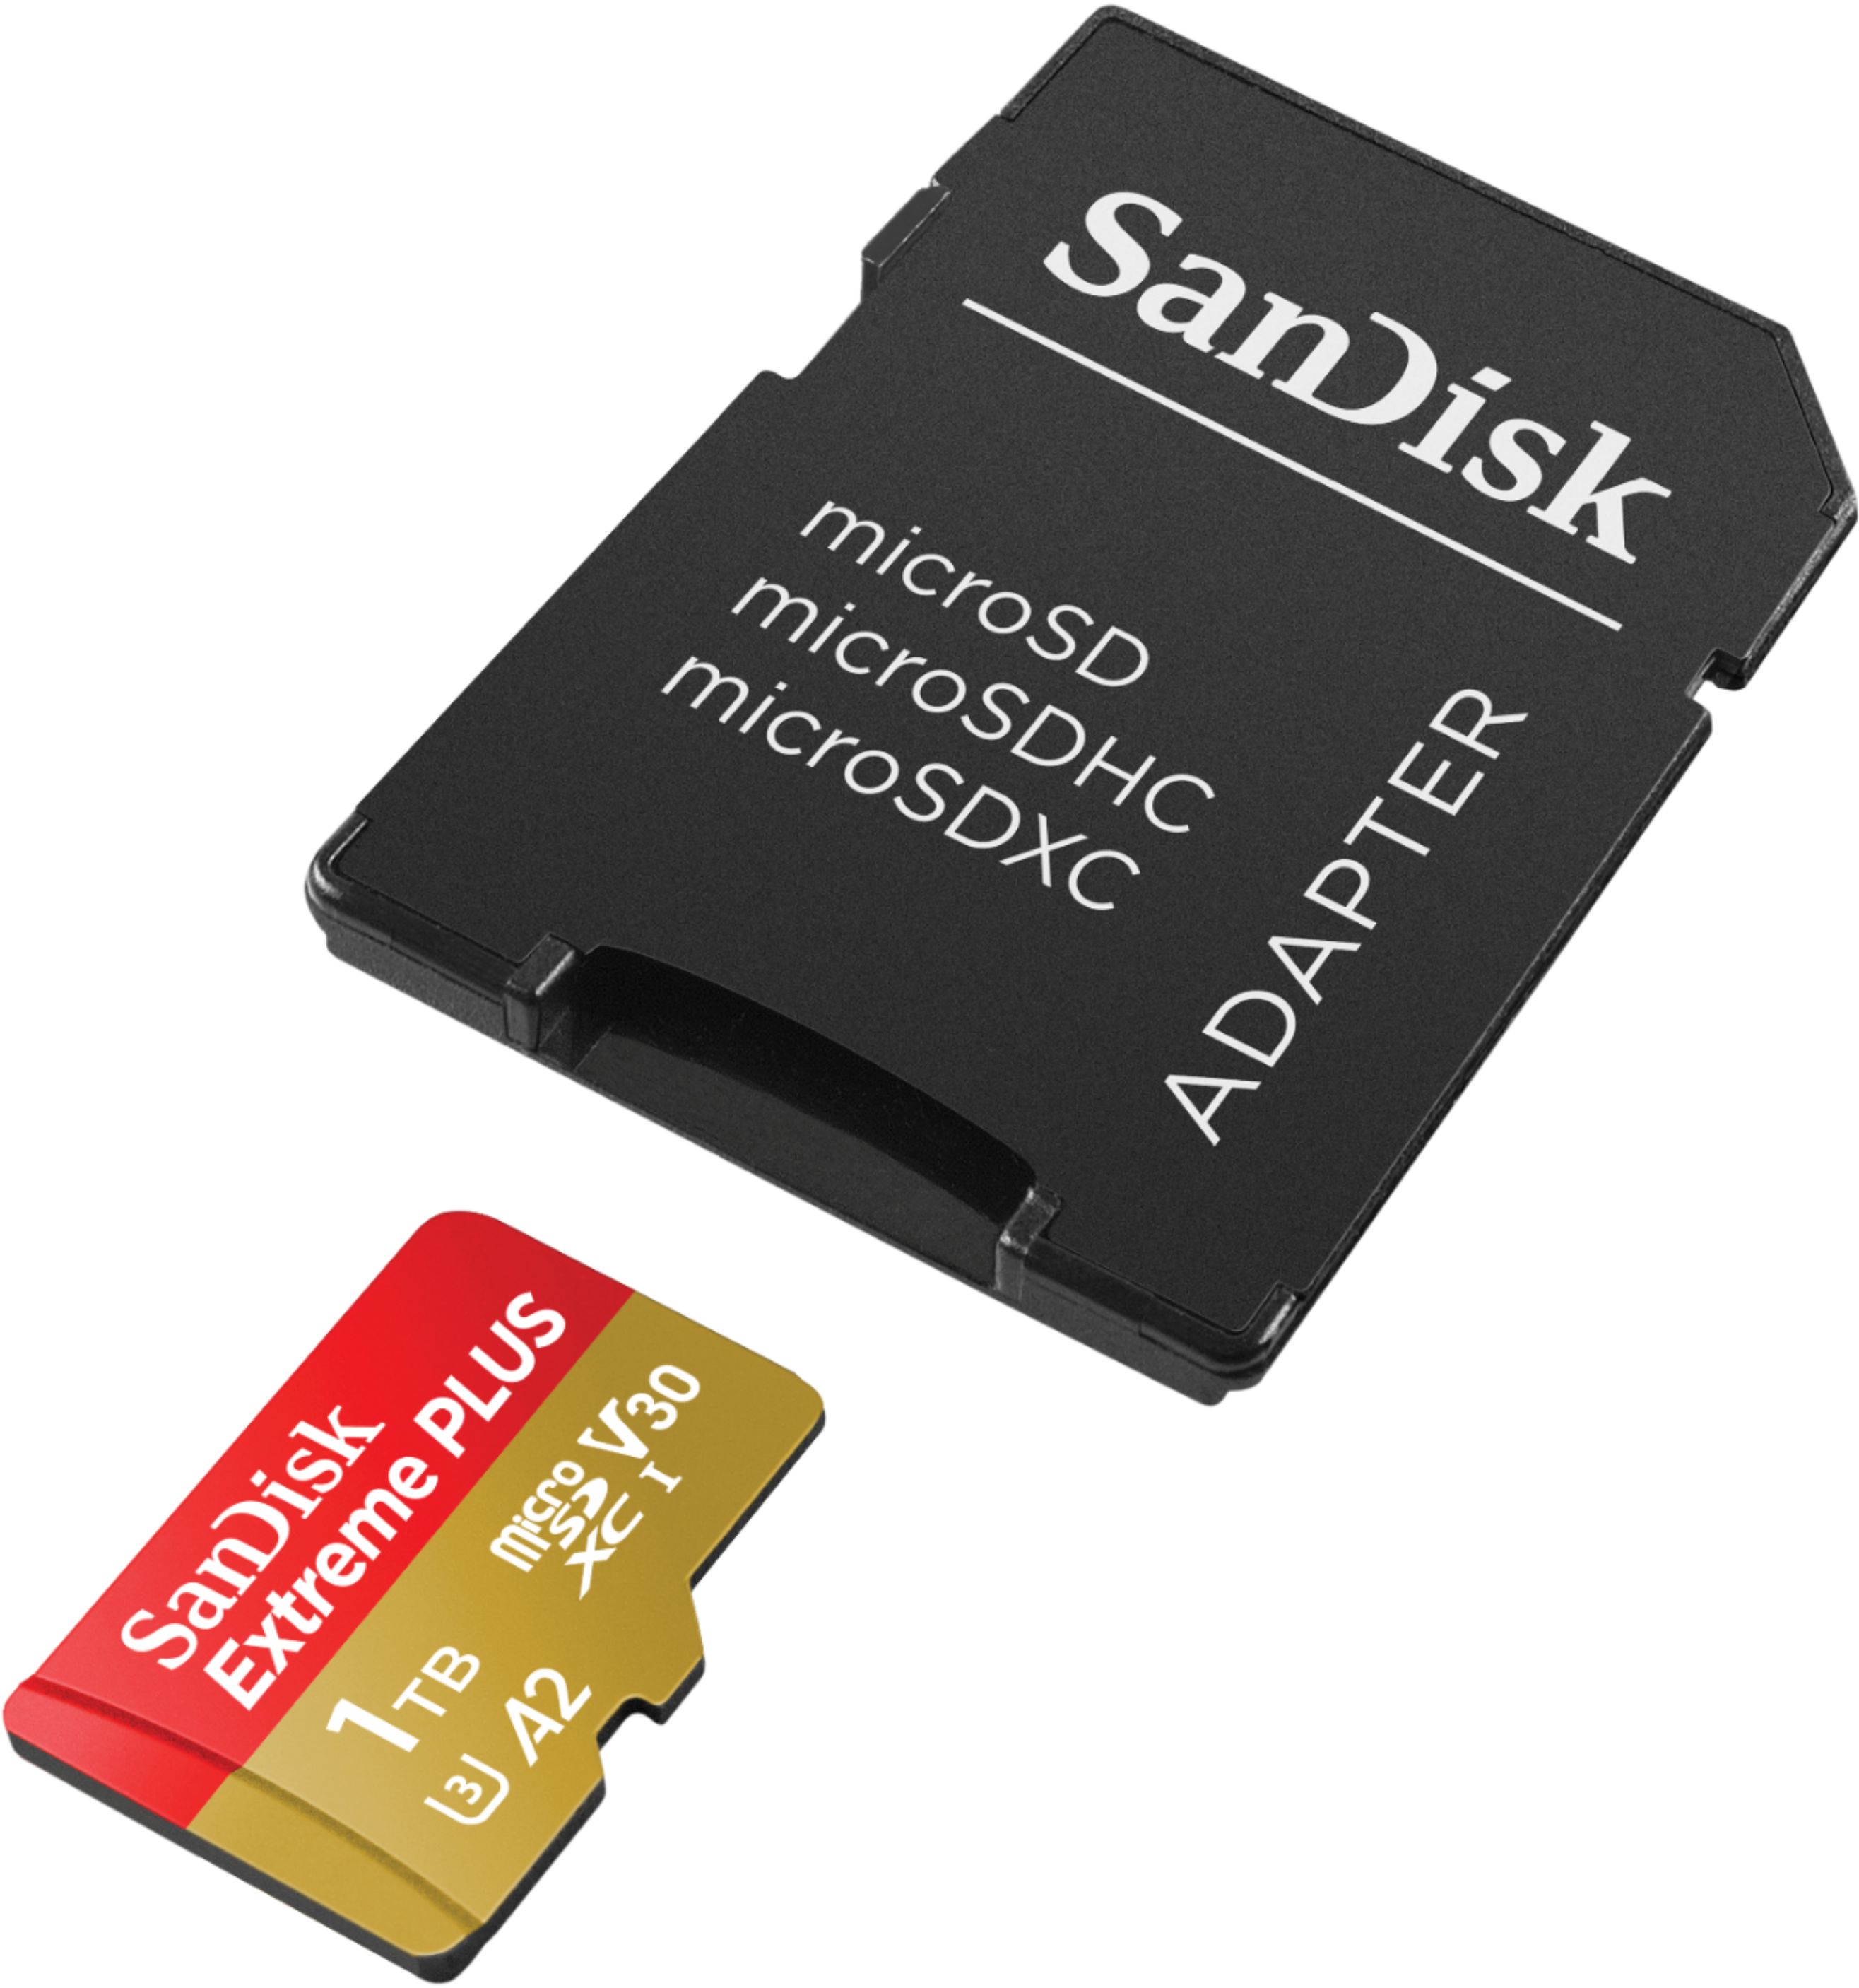 1tb micro sd card for nintendo switch